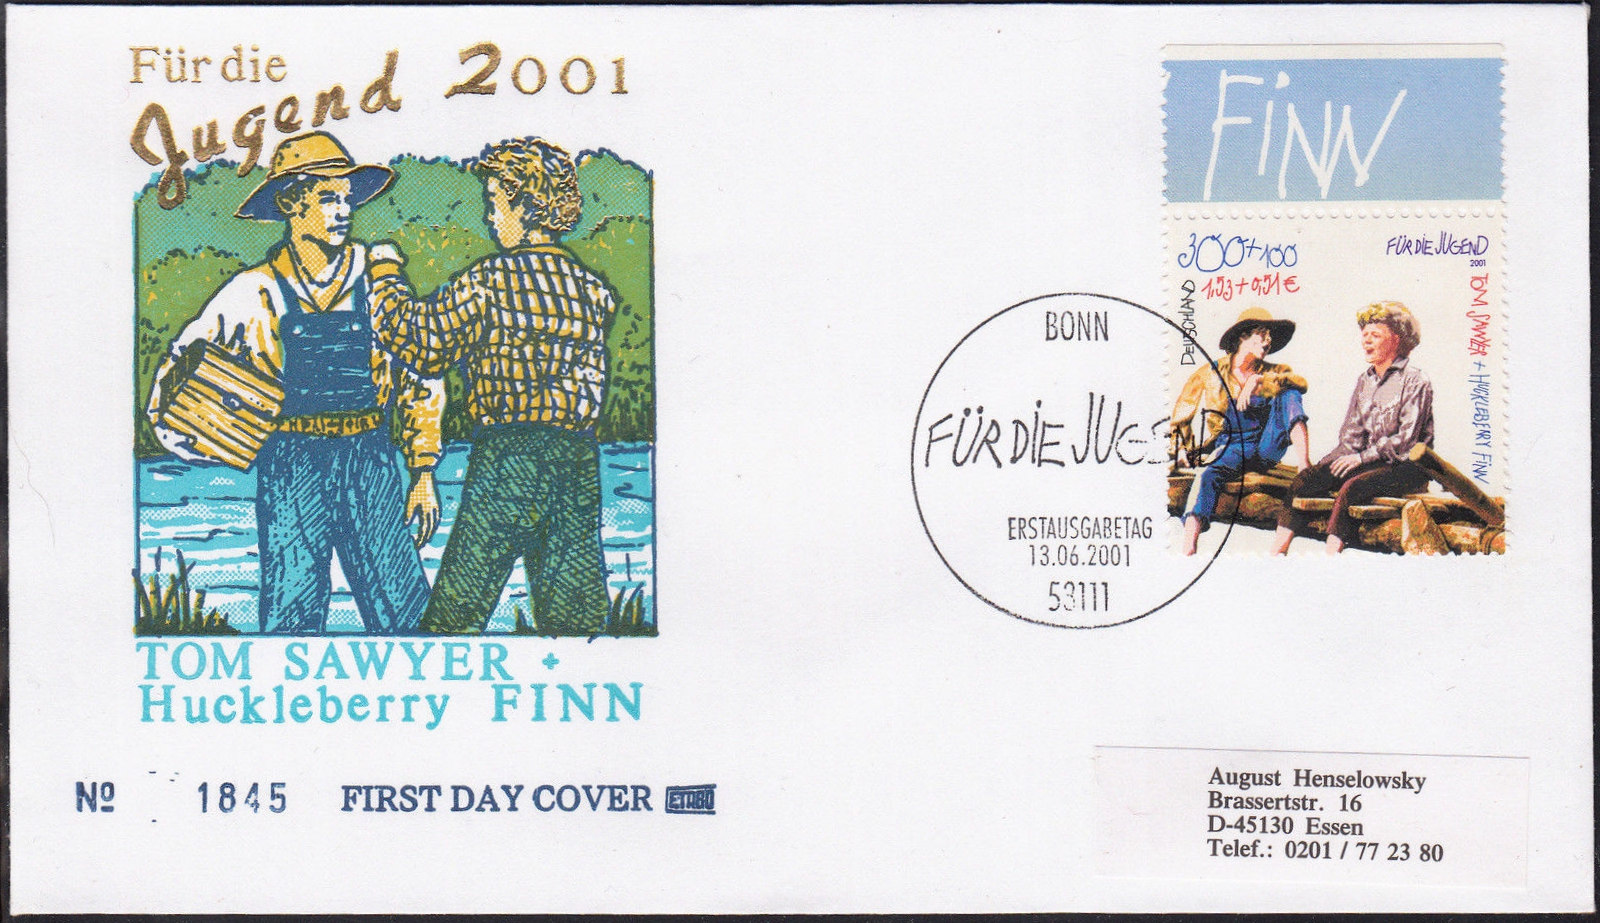 Germany - Scott #B889 (2001) first day cover